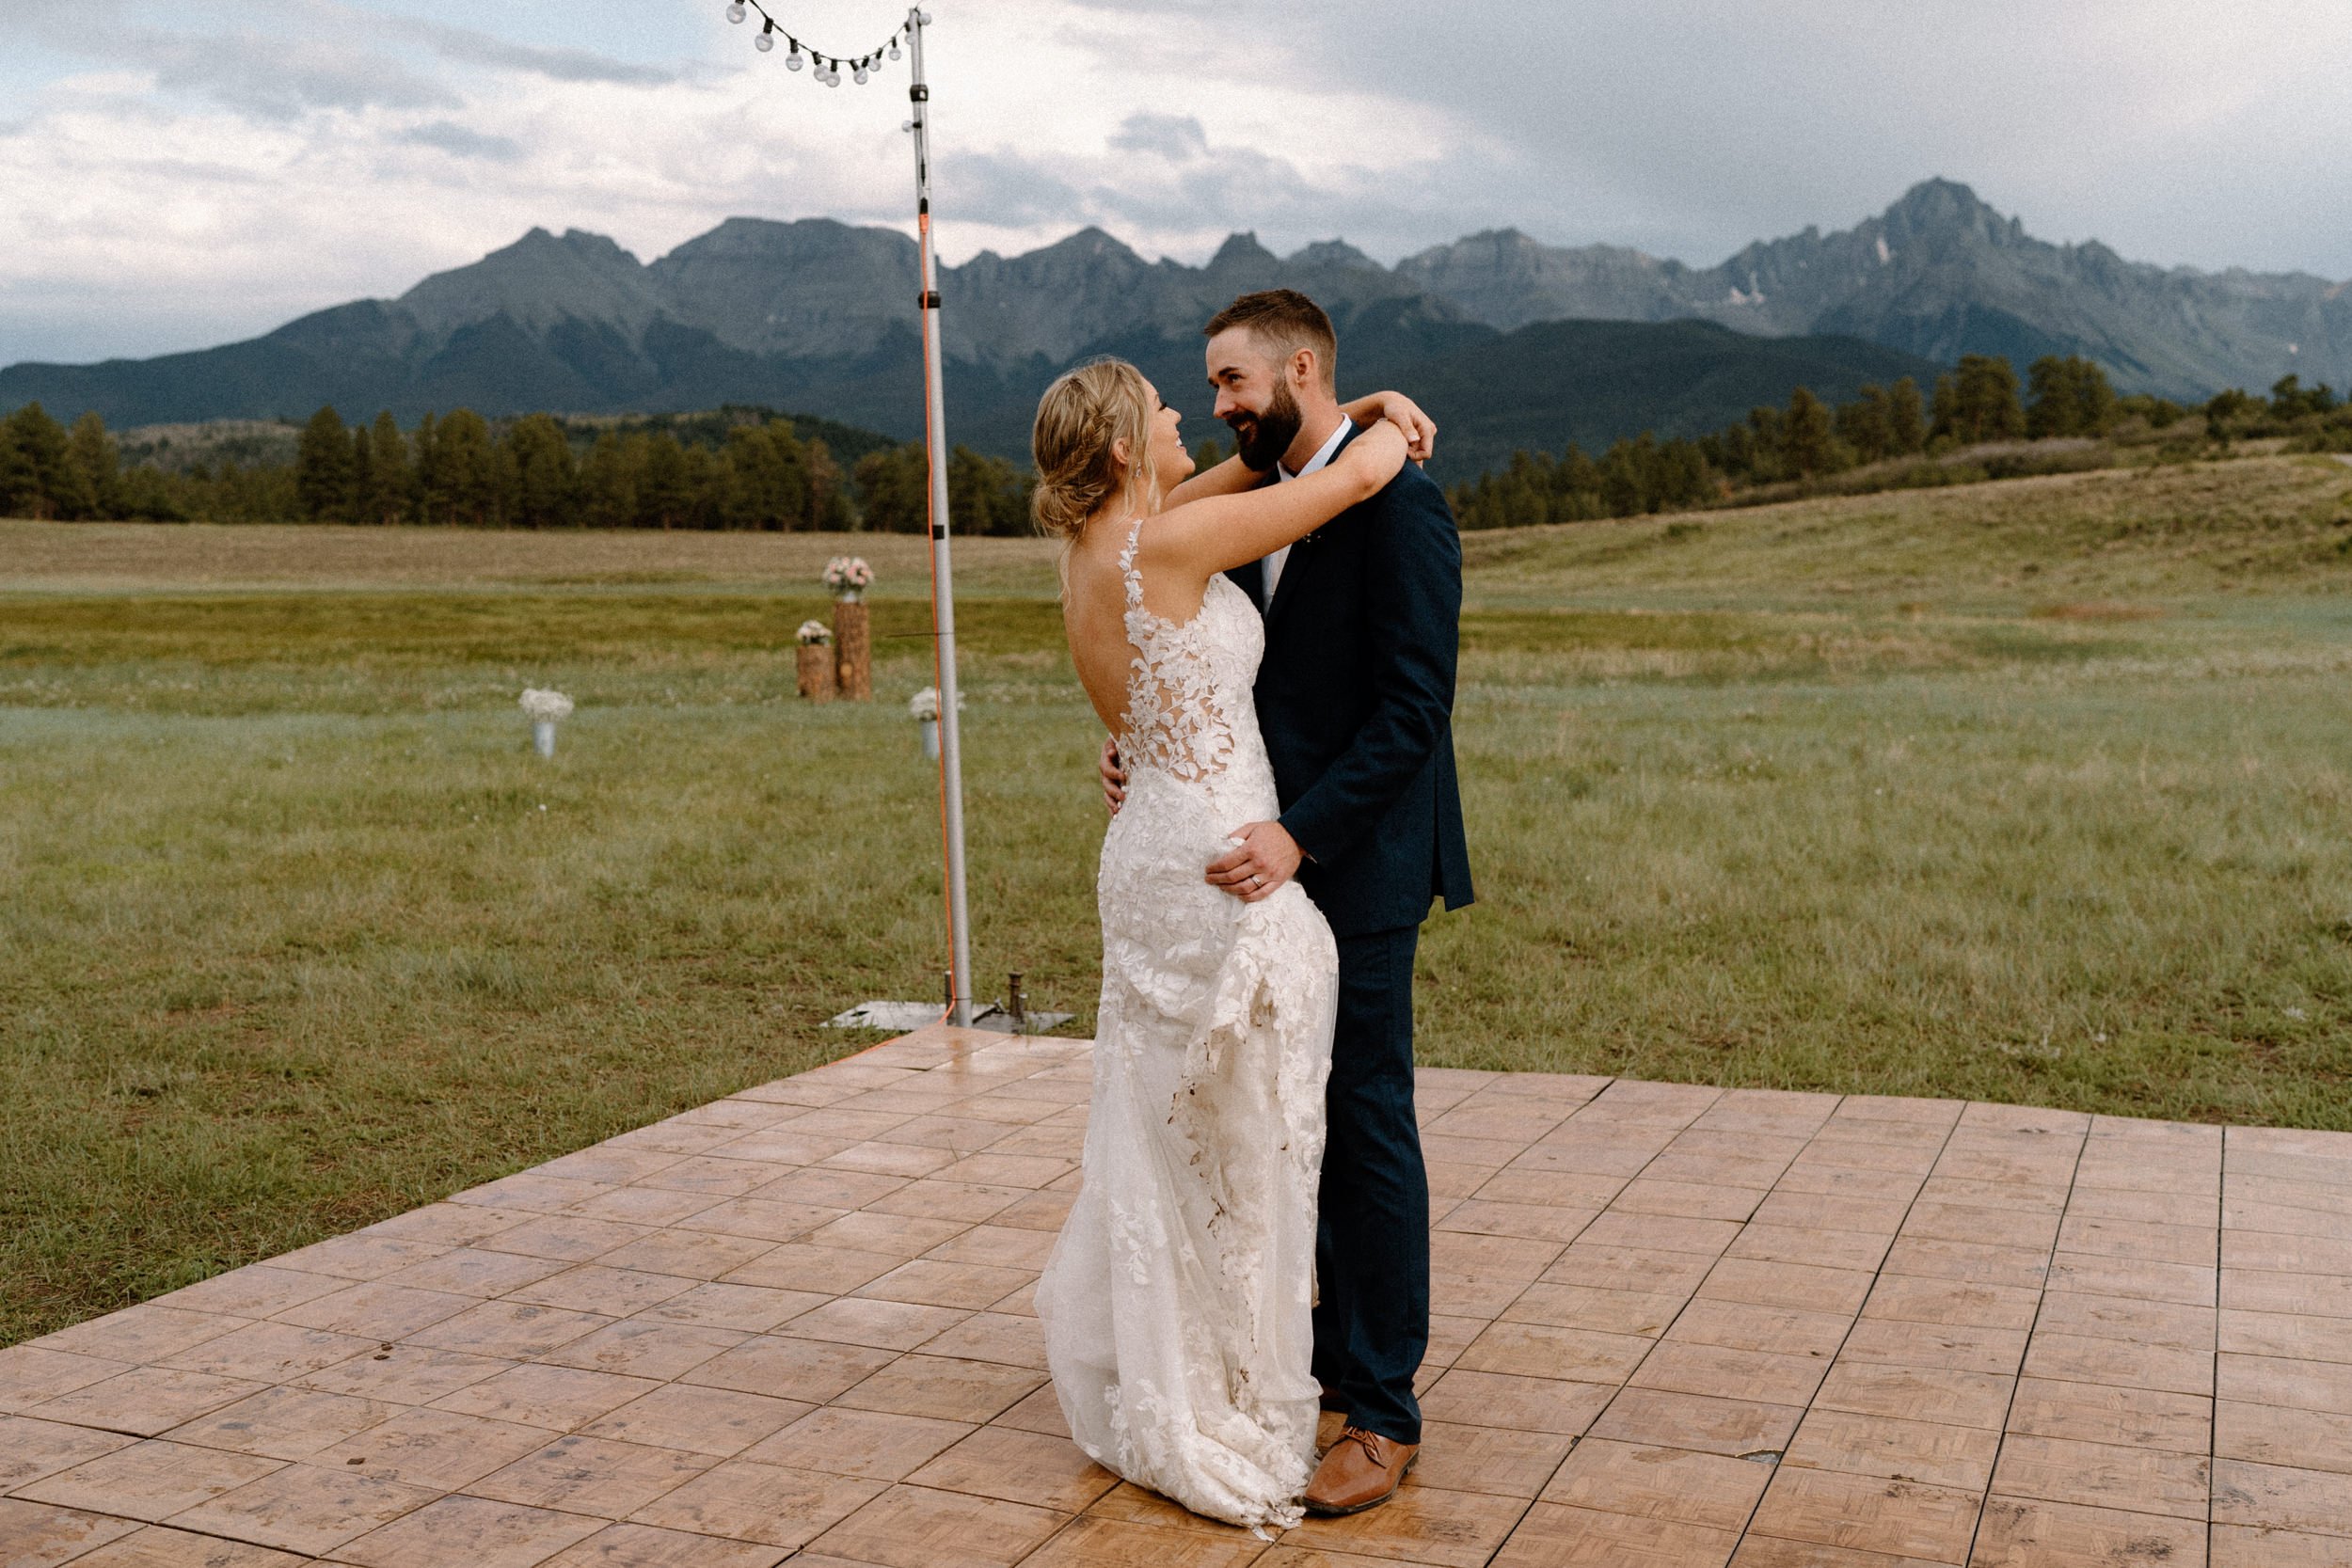 Bride and groom share their first dance at Top of the Pines in Ridgway, CO